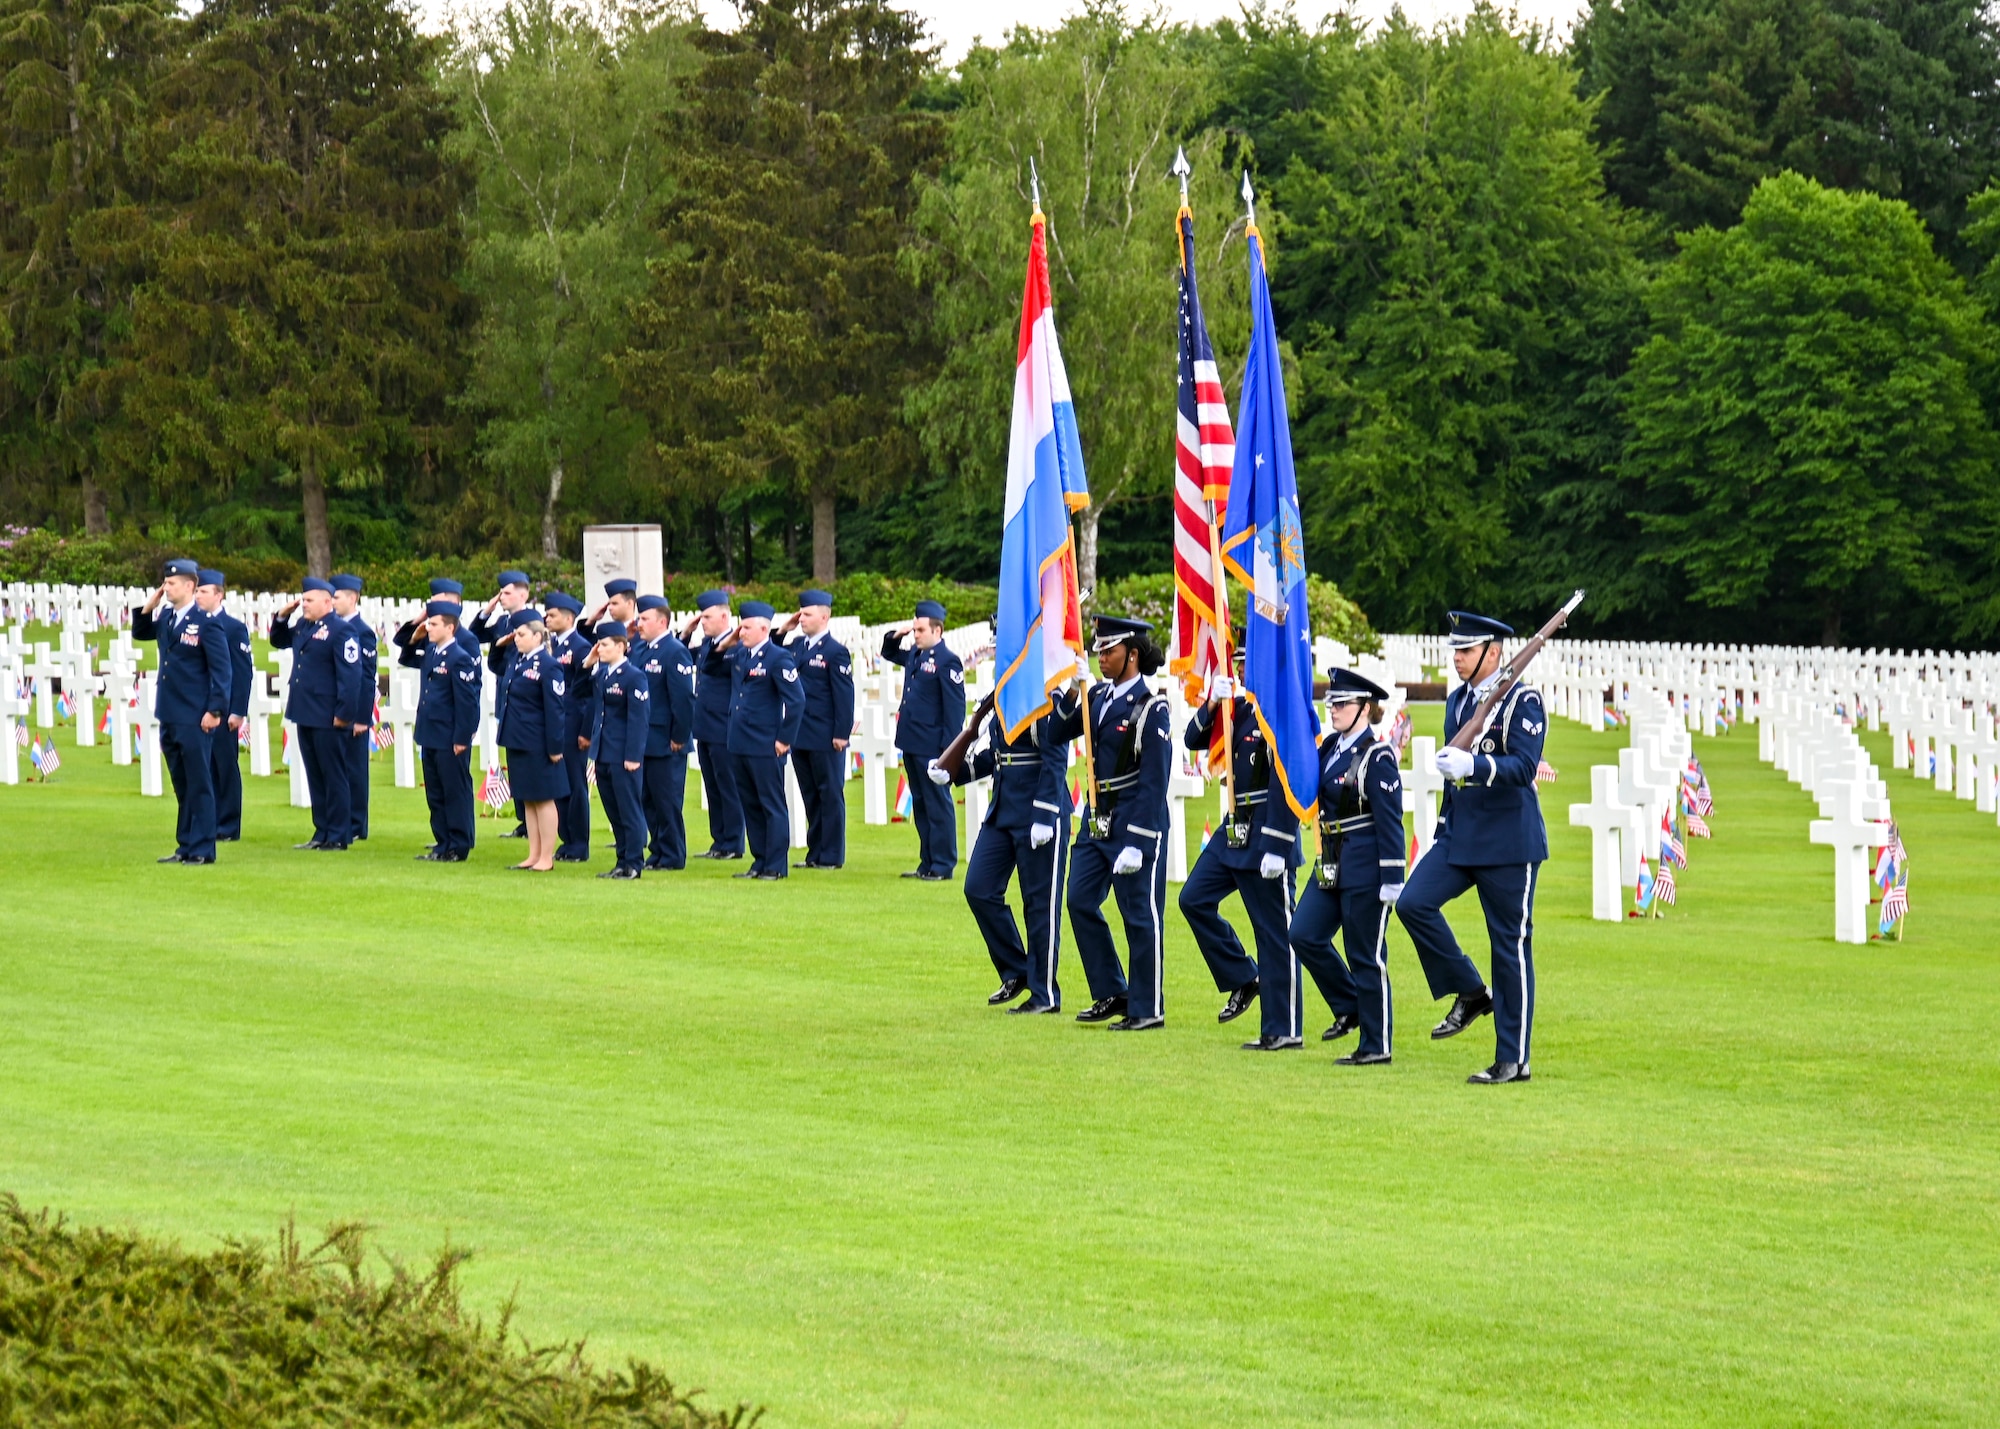 The 786th Force Support Squadron Honor Guard, assigned to Ramstein Air Base and a detail of Airmen assigned to the 726th Air Mobility Squadron, Spangdahlem AB, Germany, salute during a Memorial Day event at the Luxembourg American Military Cemetery in Luxembourg, May 28, 2022. The 726th AMS has historically been the Honor Platoon for this event.  (U.S. Air Force photo by Airman 1st Class Jessica Sanchez-Chen)